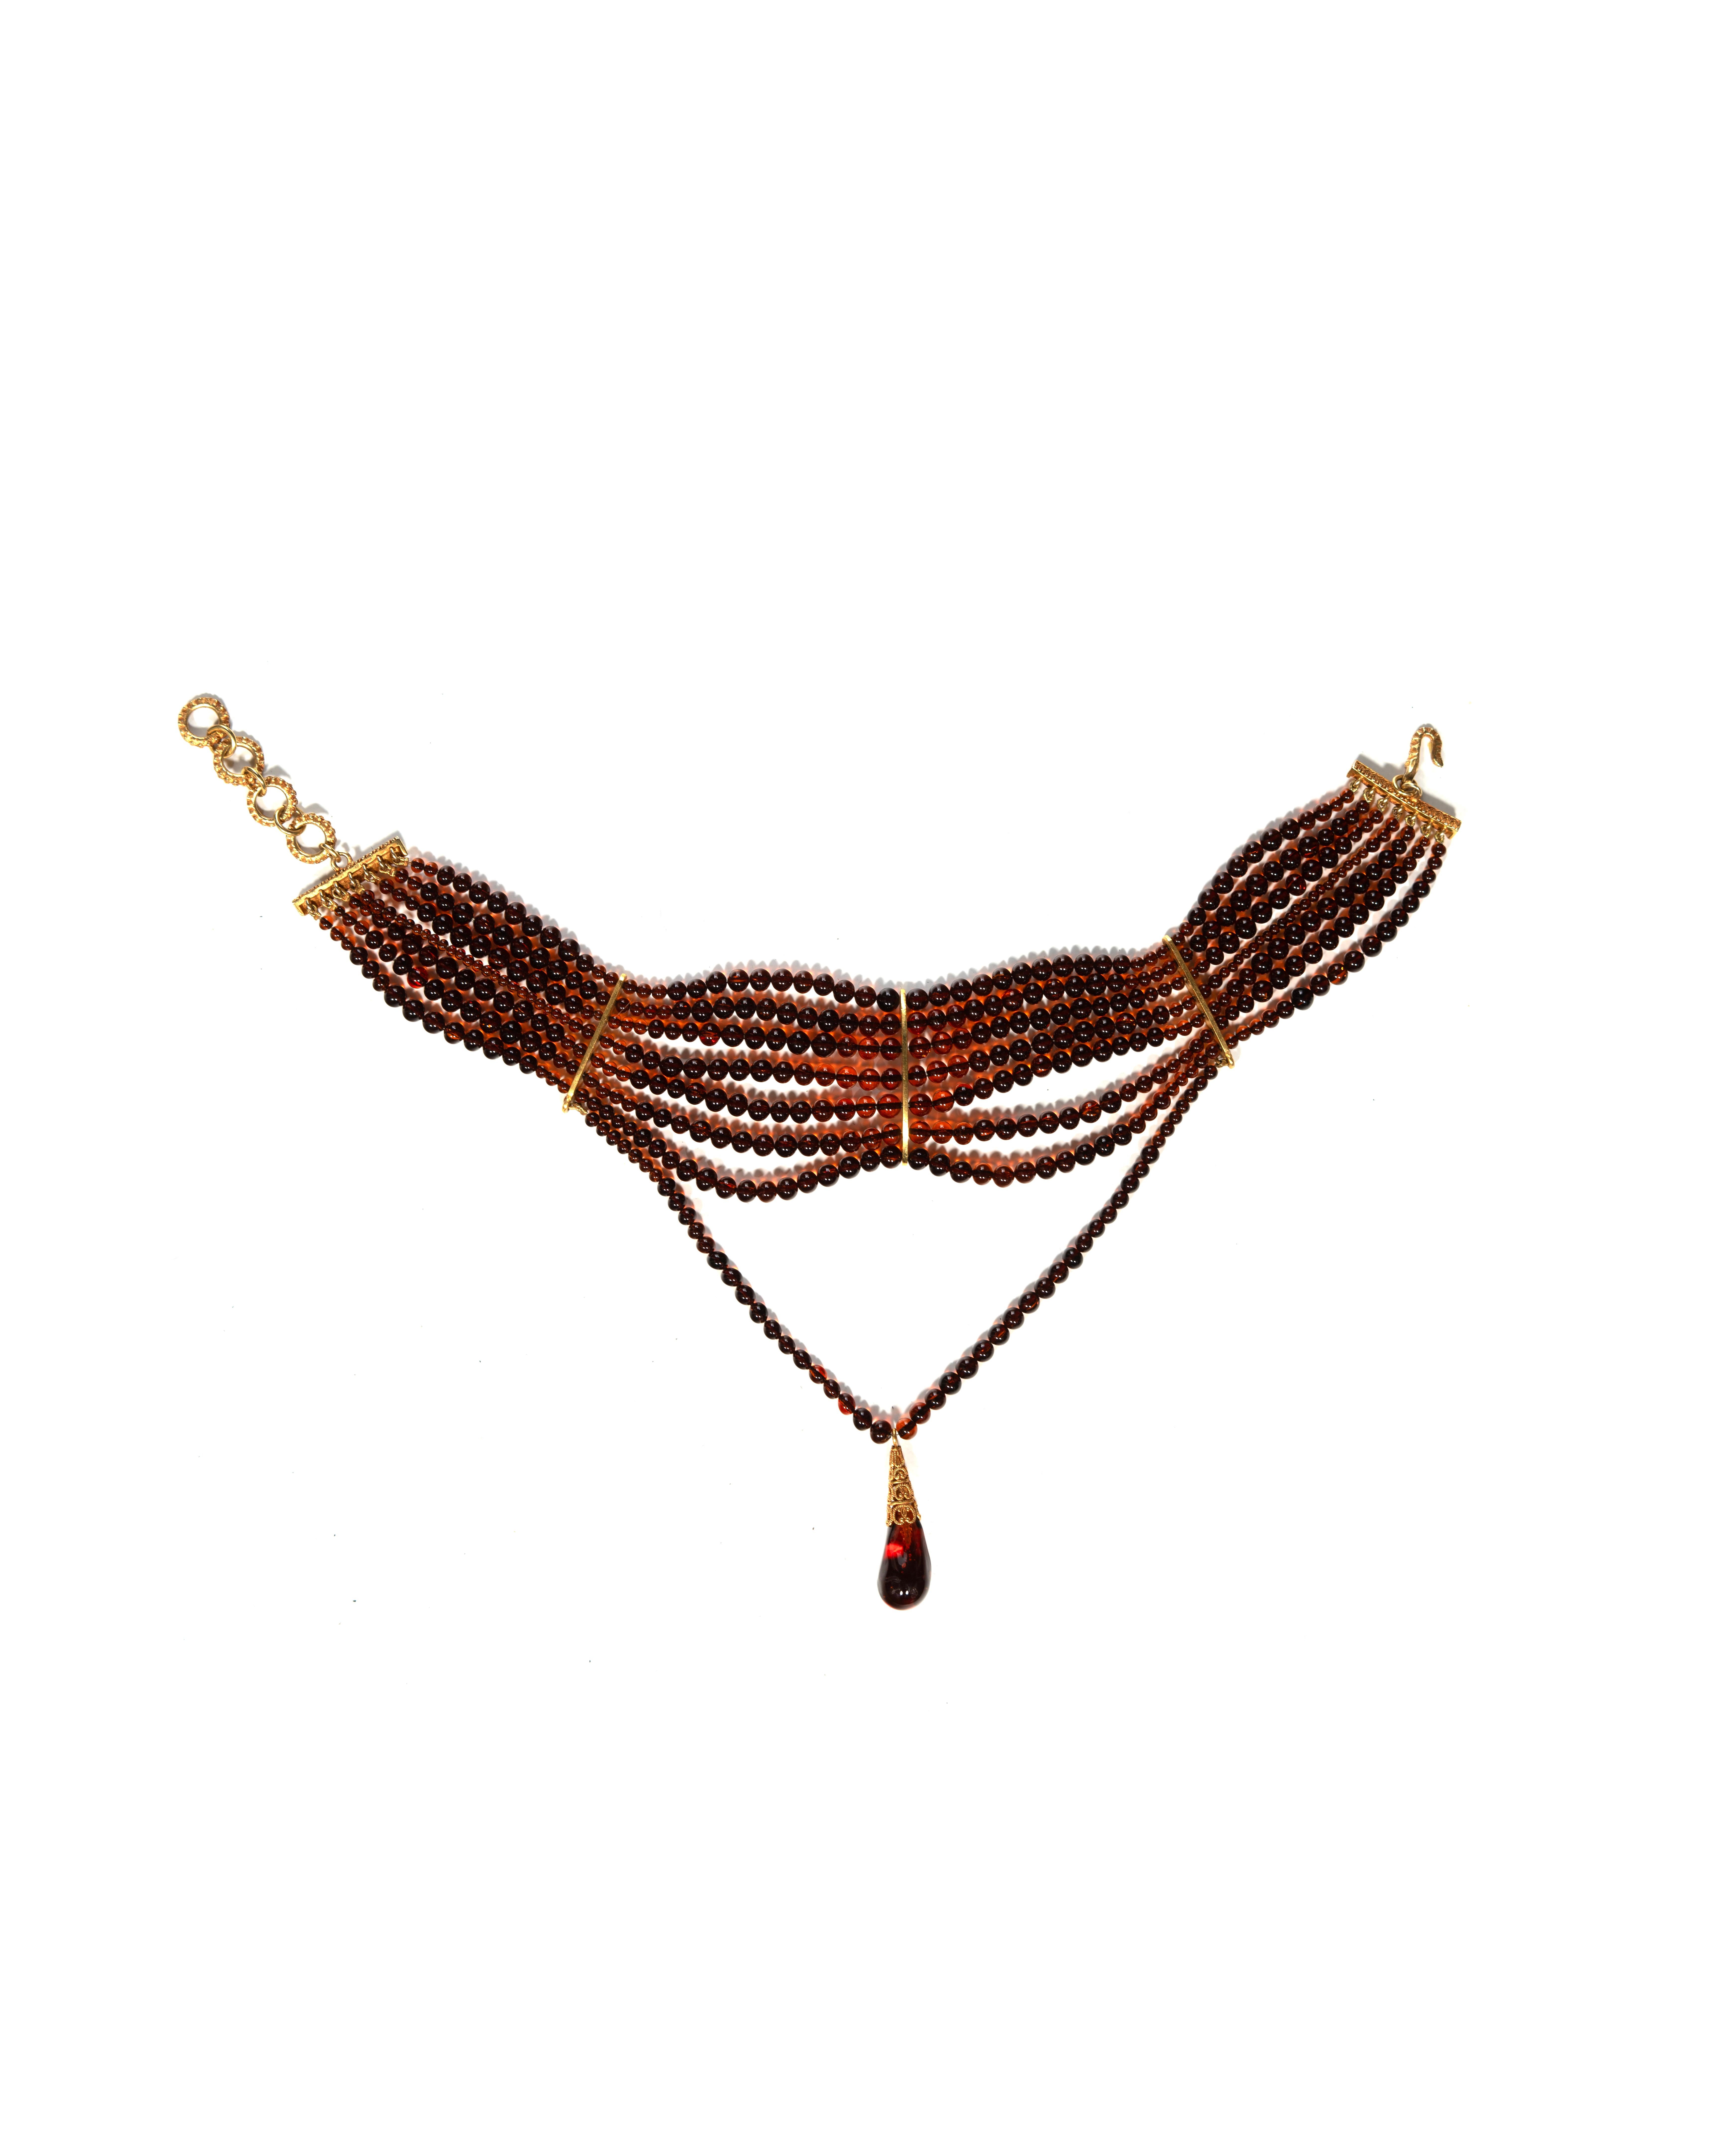 ▪ Archival Christian Dior 'Masai' Choker Necklace
▪ Creative Director: John Galliano
▪ c. 1998 
▪ Sold by One of a Kind Archive
▪ Embellished with 7 strands of exquisite amber glass beads
▪ The centerpiece boasts an additional hanging strand adorned